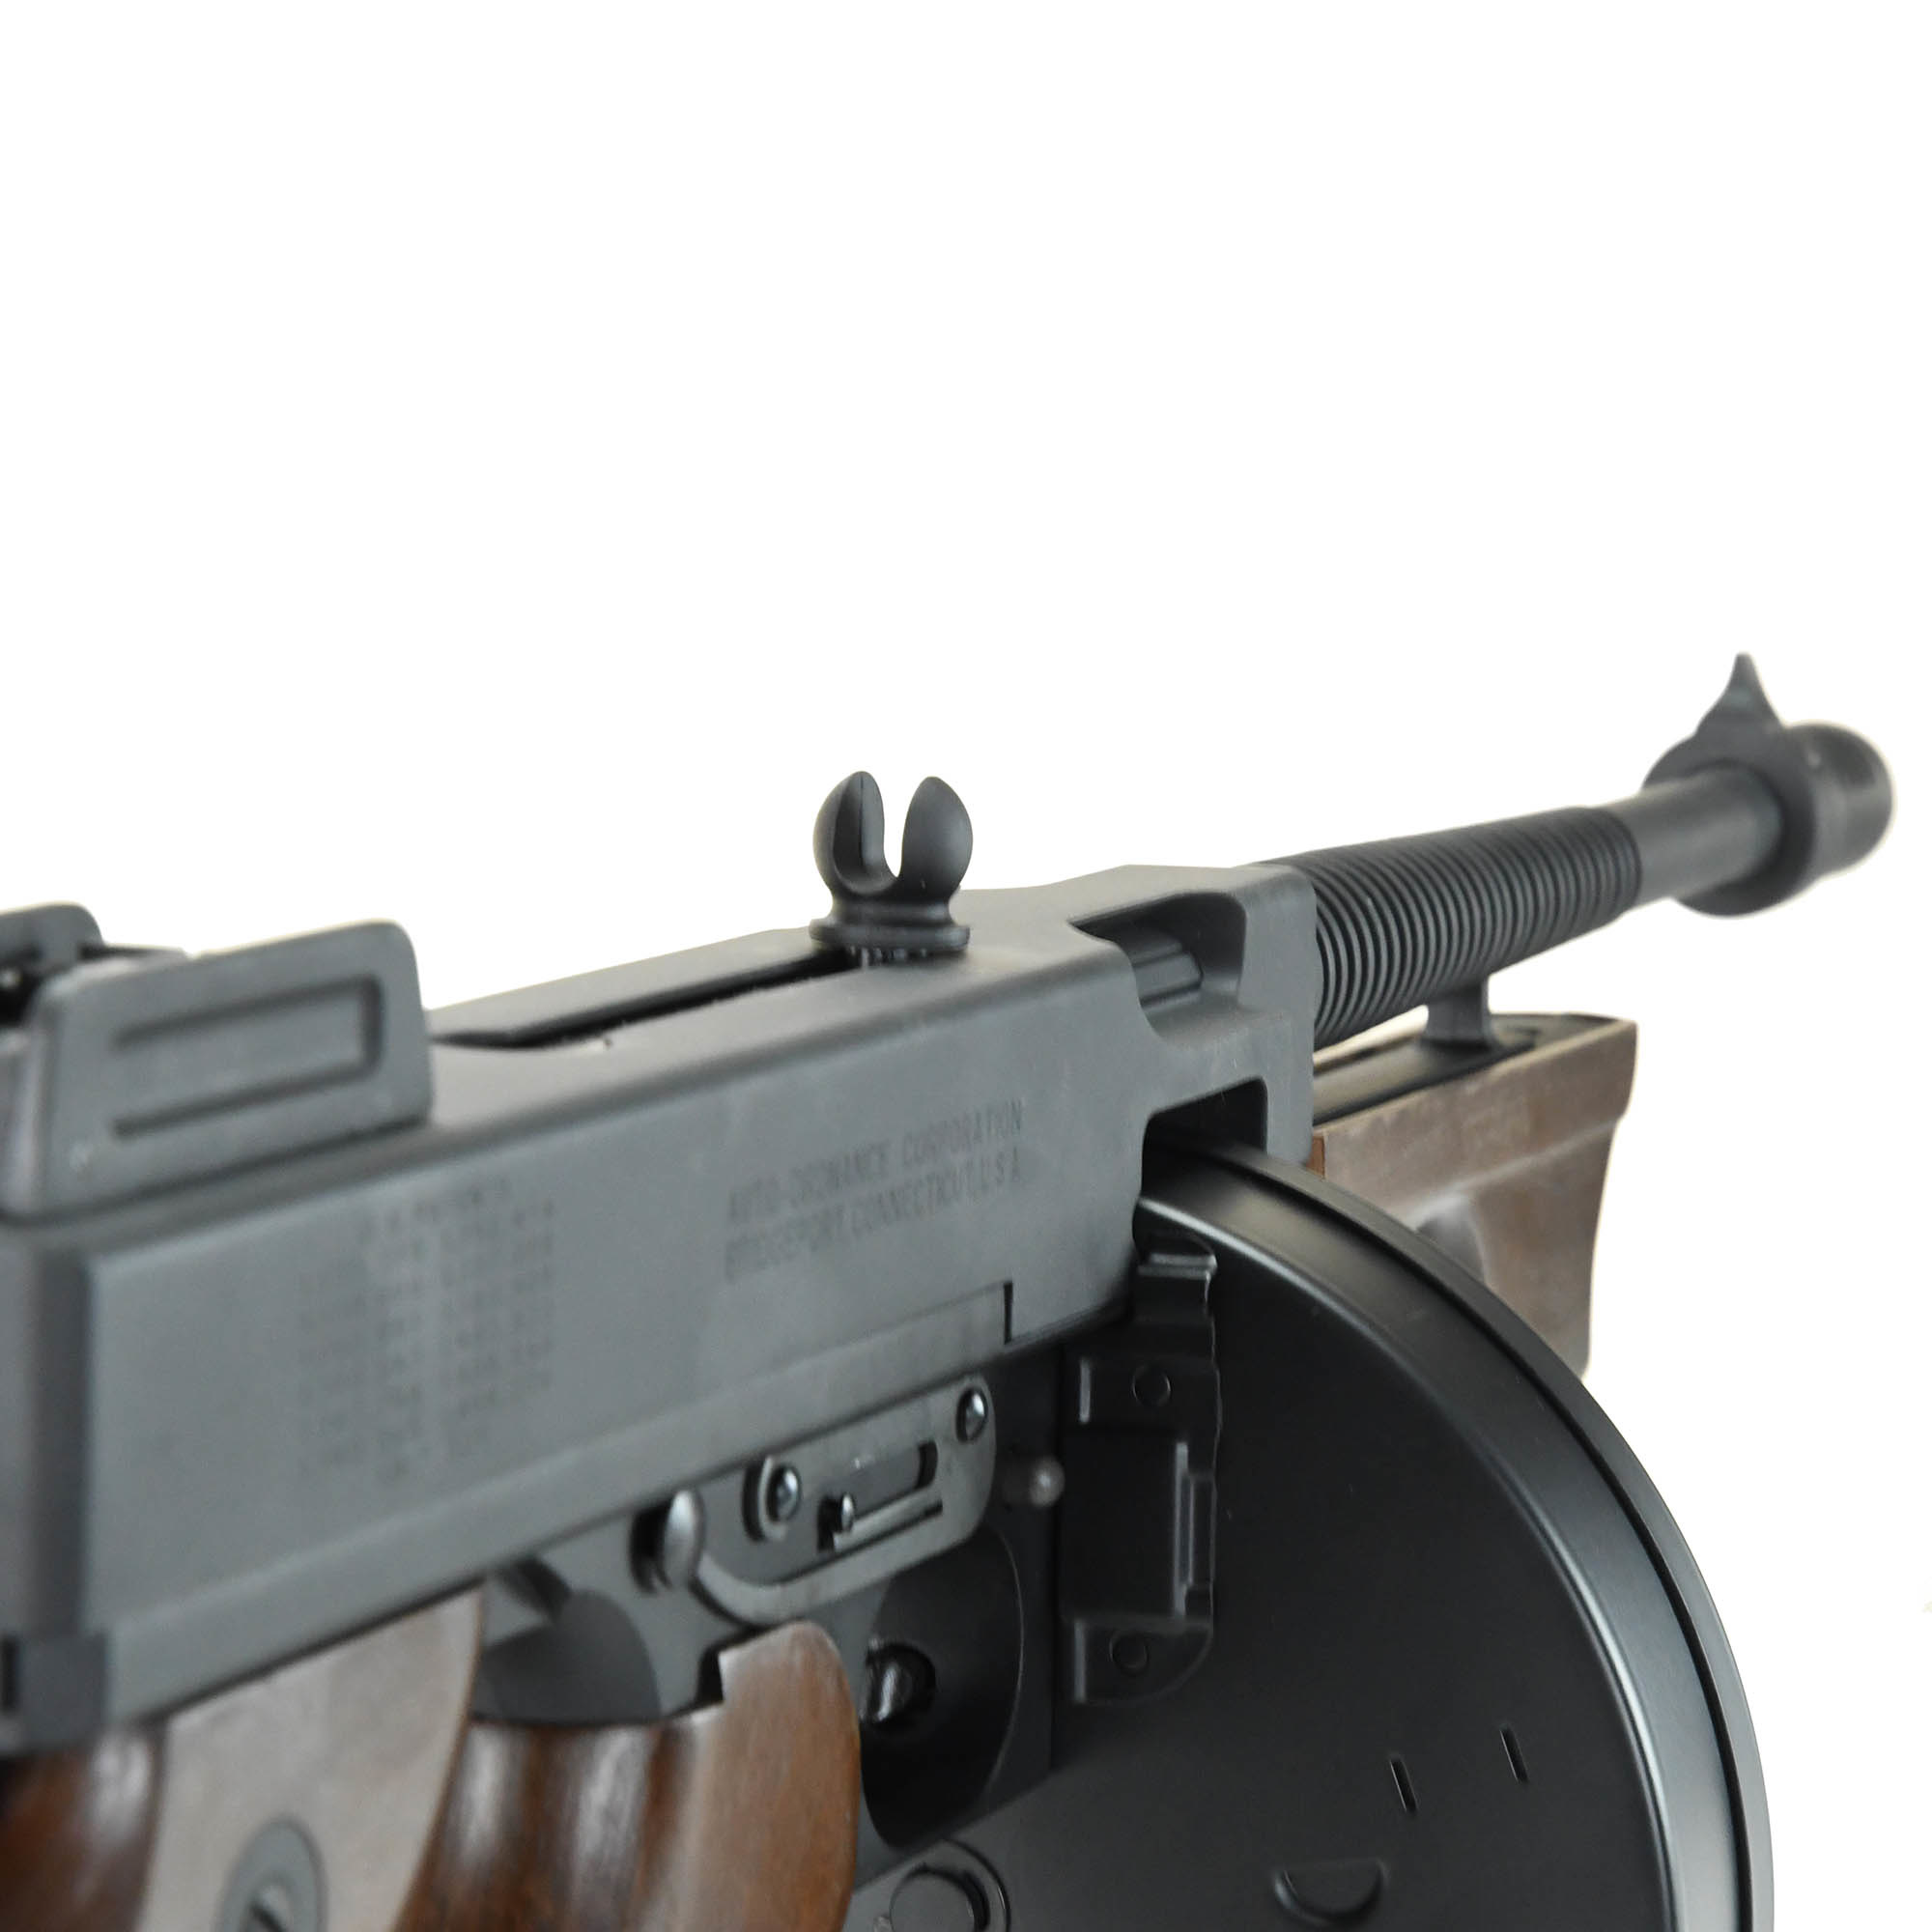 King Arms Thompson M1928 AEG 1.49 Joule - real wood